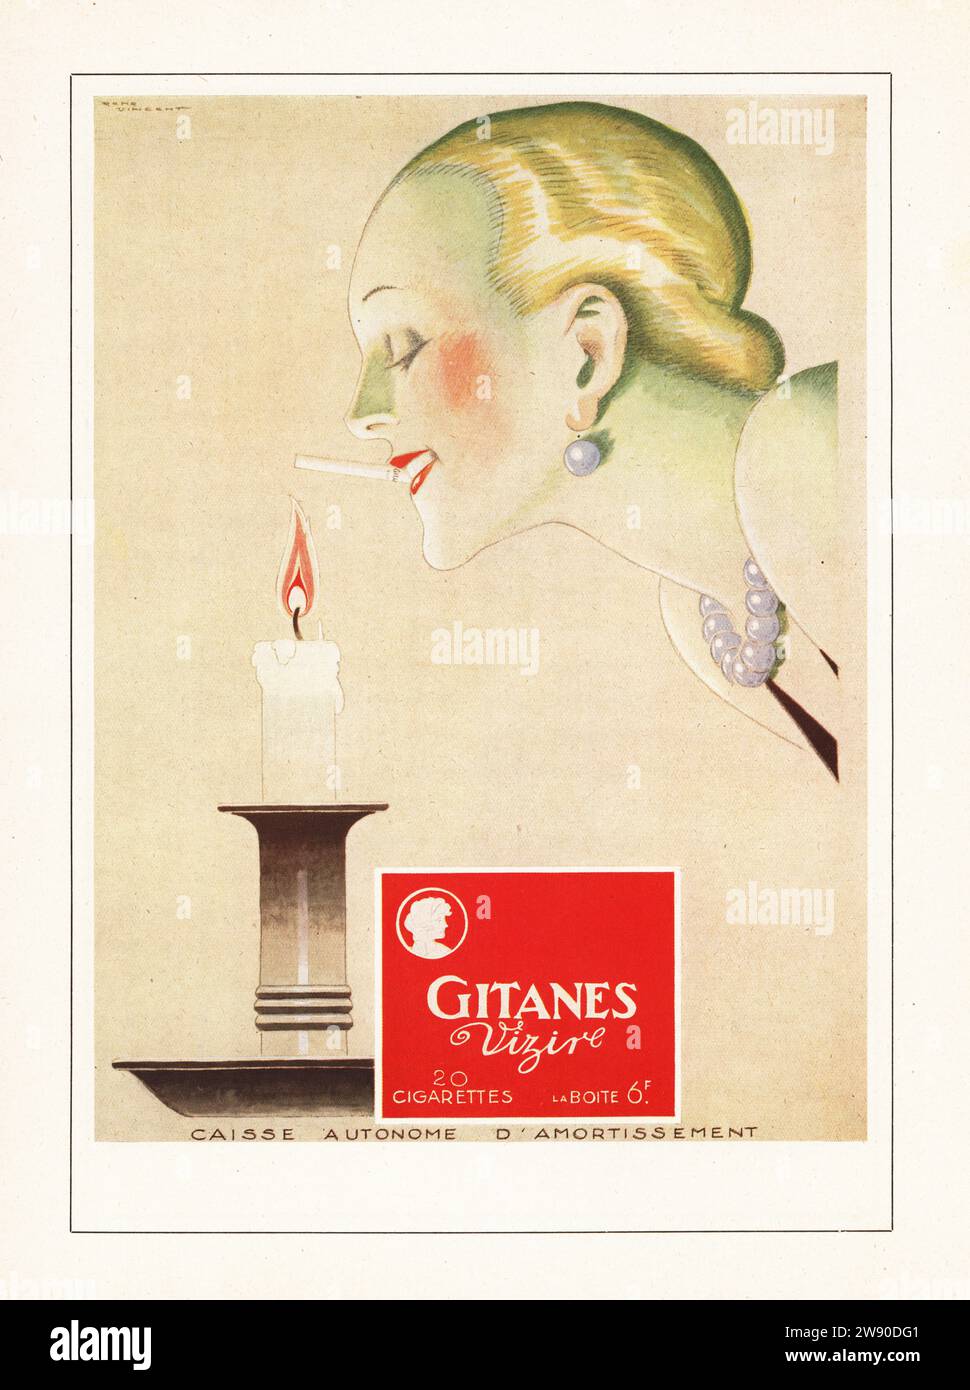 Magazine ad for French cigarette brand Gitanes Vizire, Paris, 1928. A fashionable woman leans over a candle to light a cigarette. Ad designed by Rene Vincent, a popular art deco style illustrator in the 20s and 30s. Colour printed ad from Art, Gout, Beaute, published by fashion magazine AGB, Lyon, 1928. Stock Photo